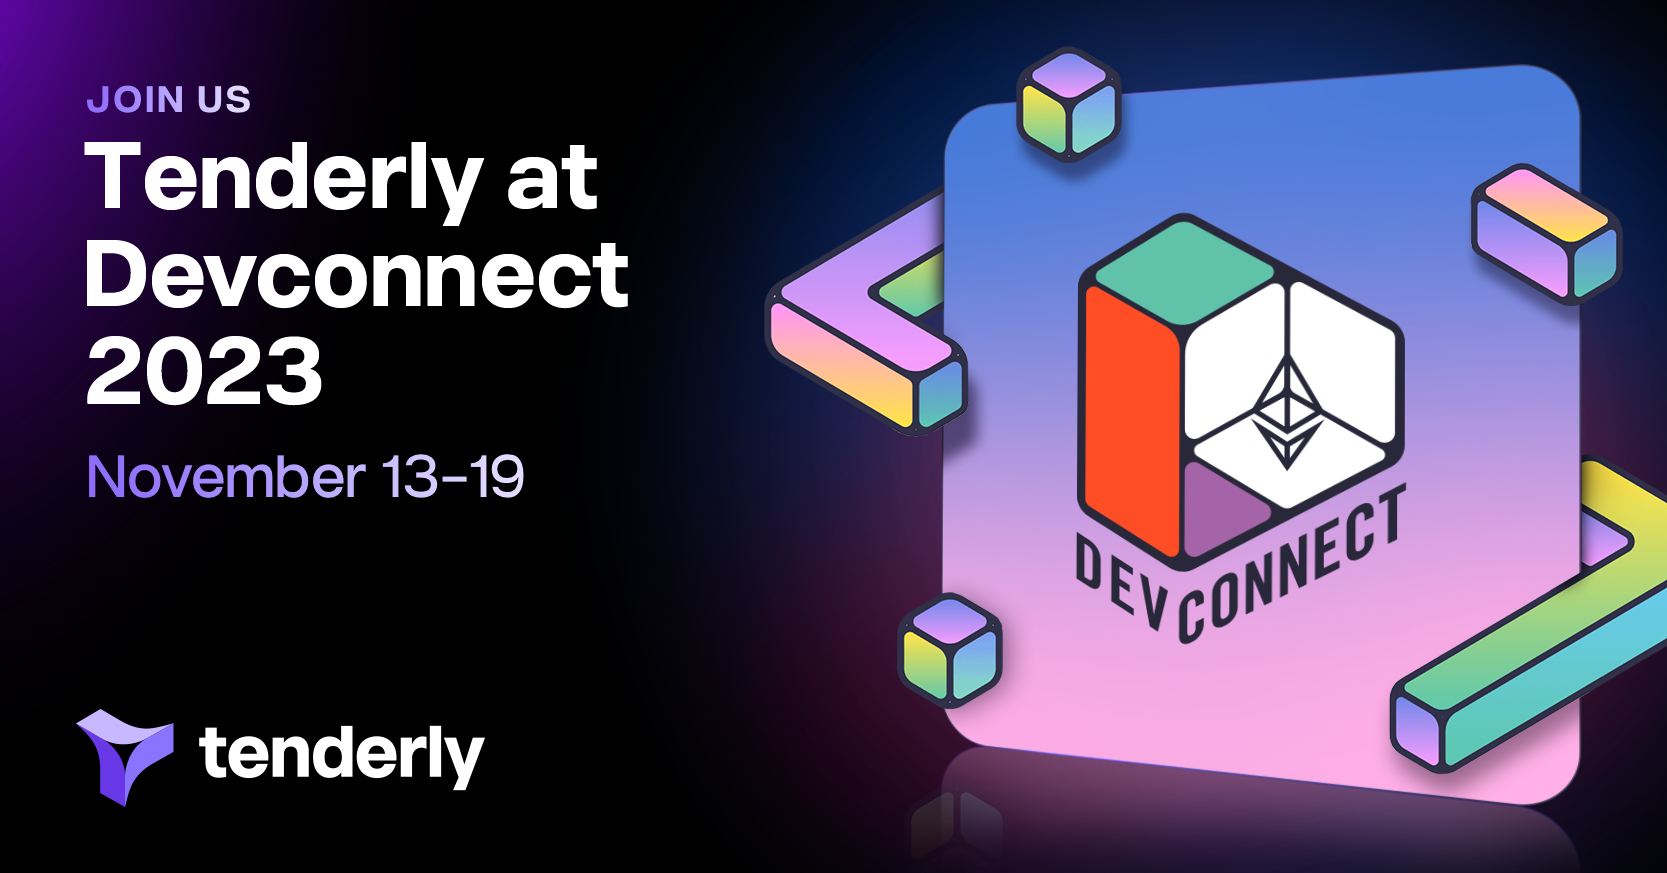 Meet the Builders at Devconnect